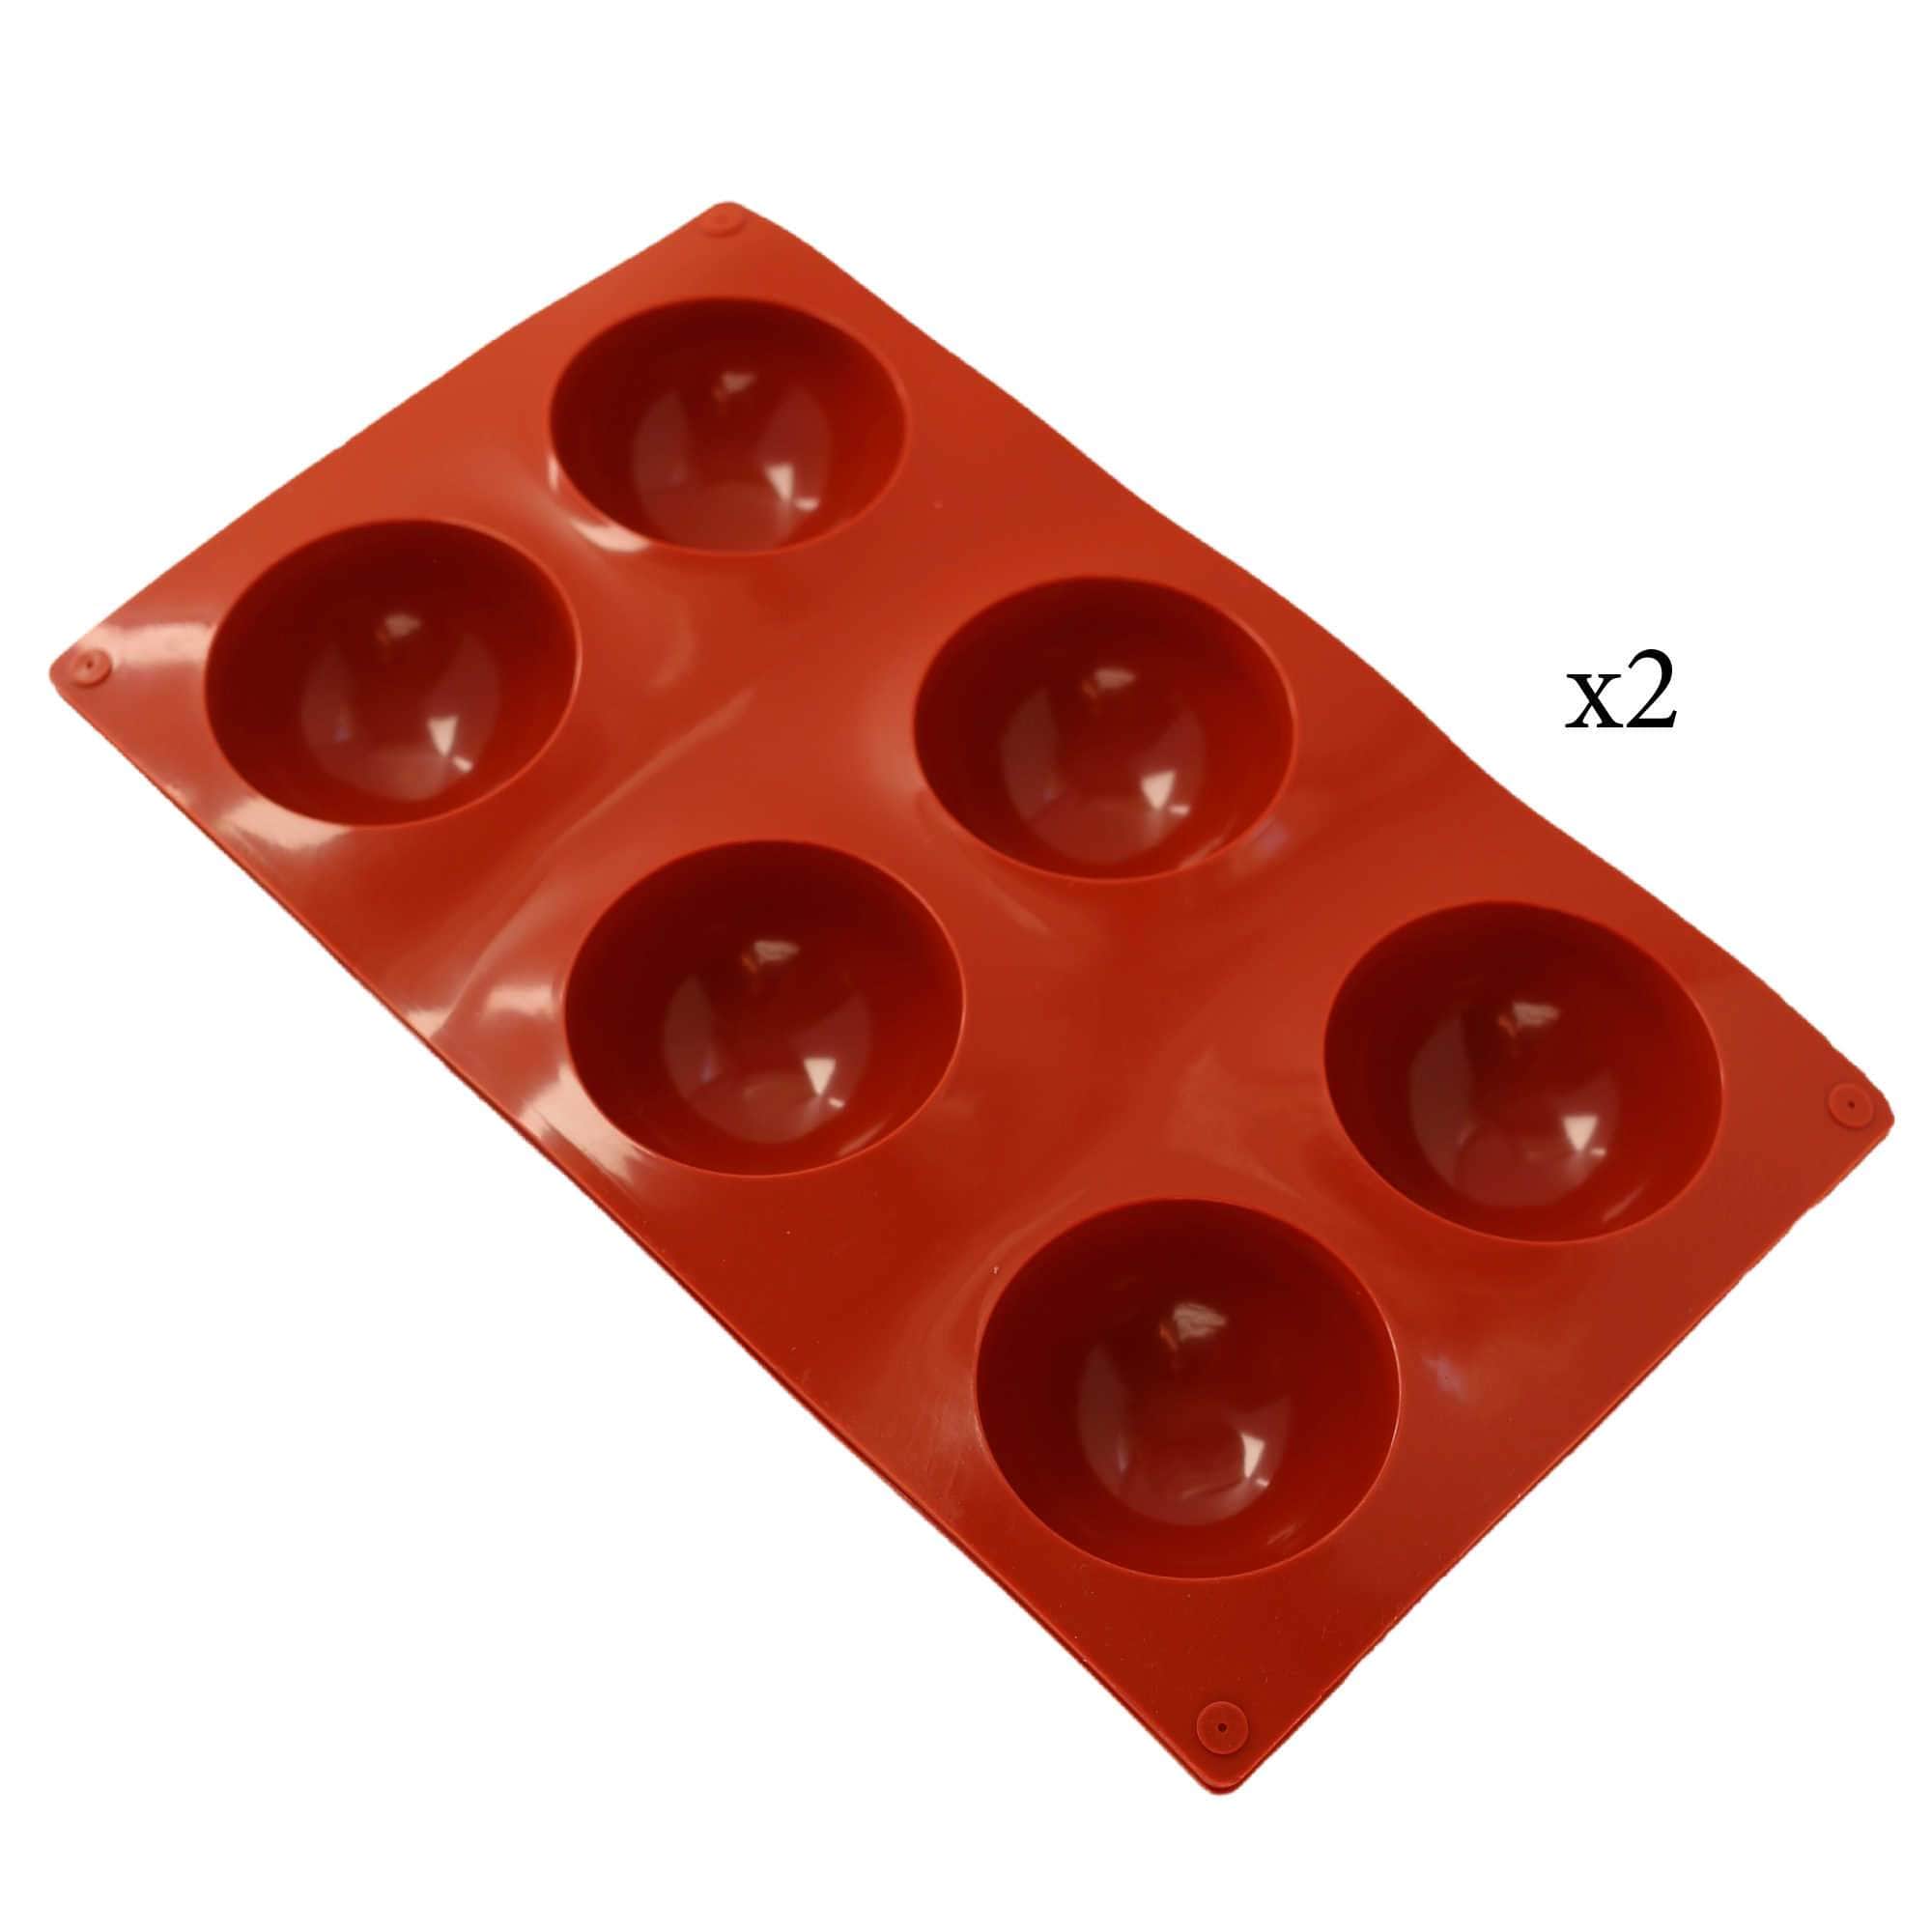 Minute Maid Red Ice Pop Mold 6ct